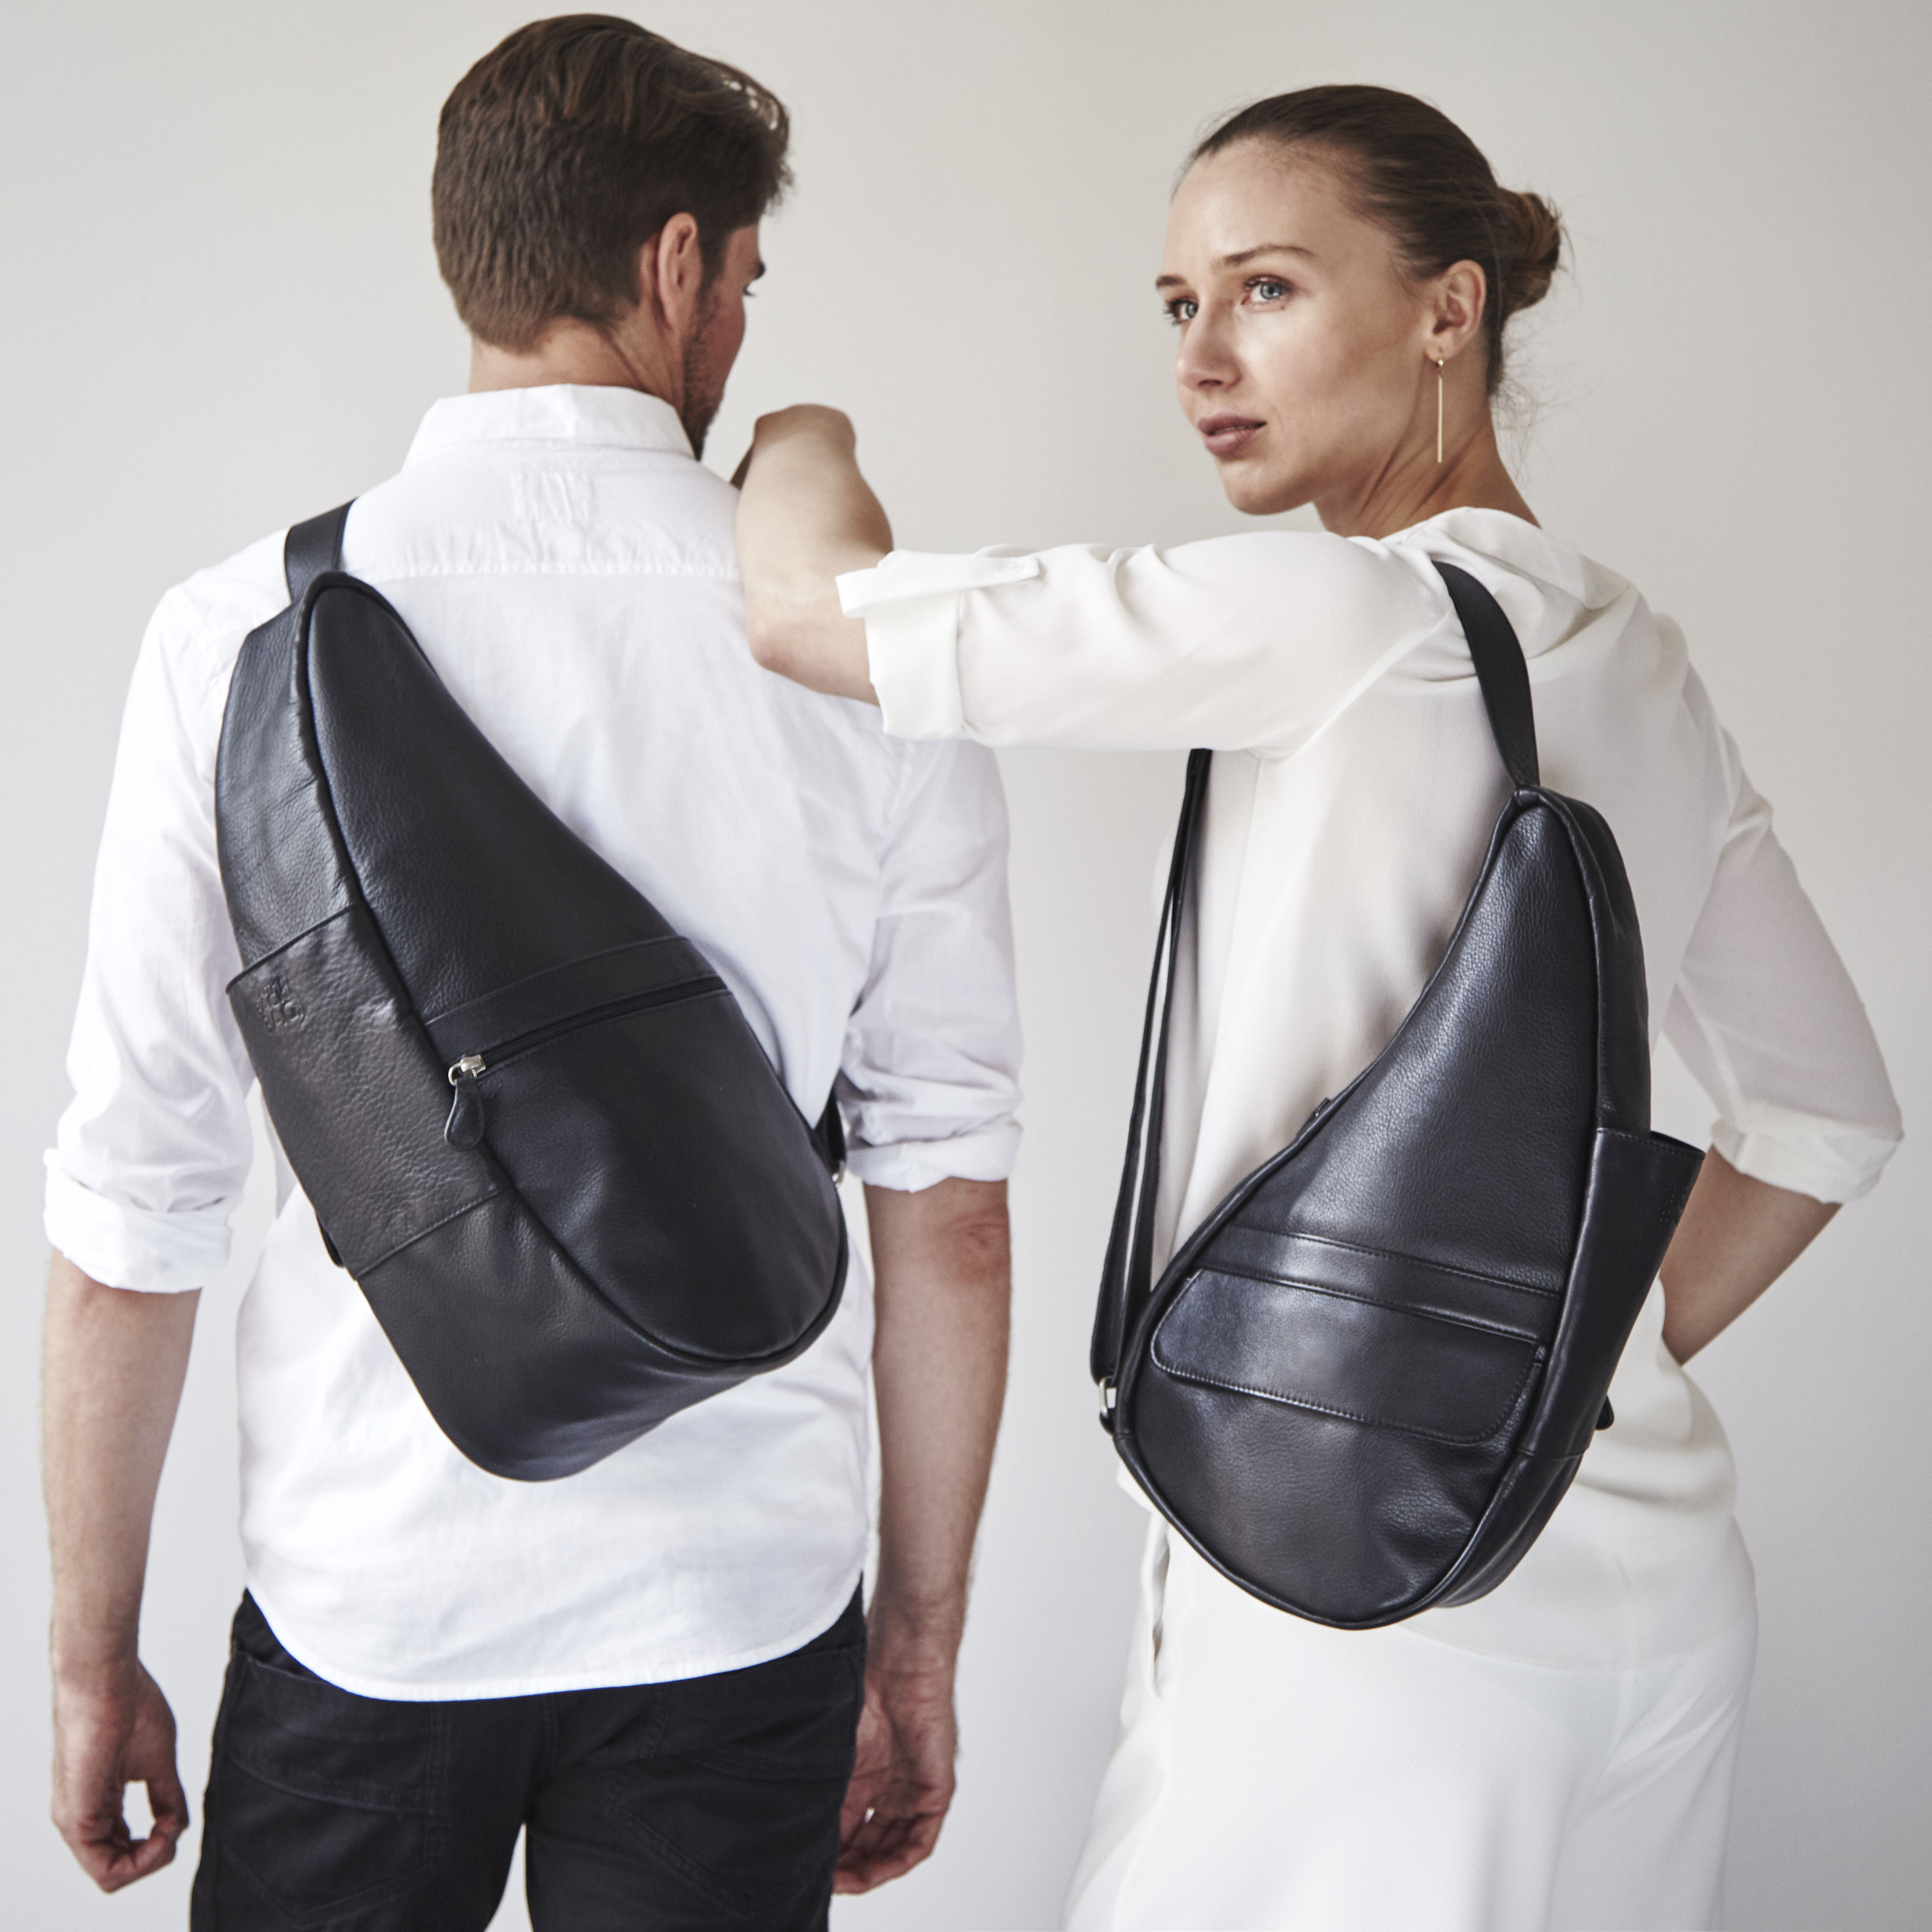 Leather Healthy Back Bag Classic medium in black on a man and woman